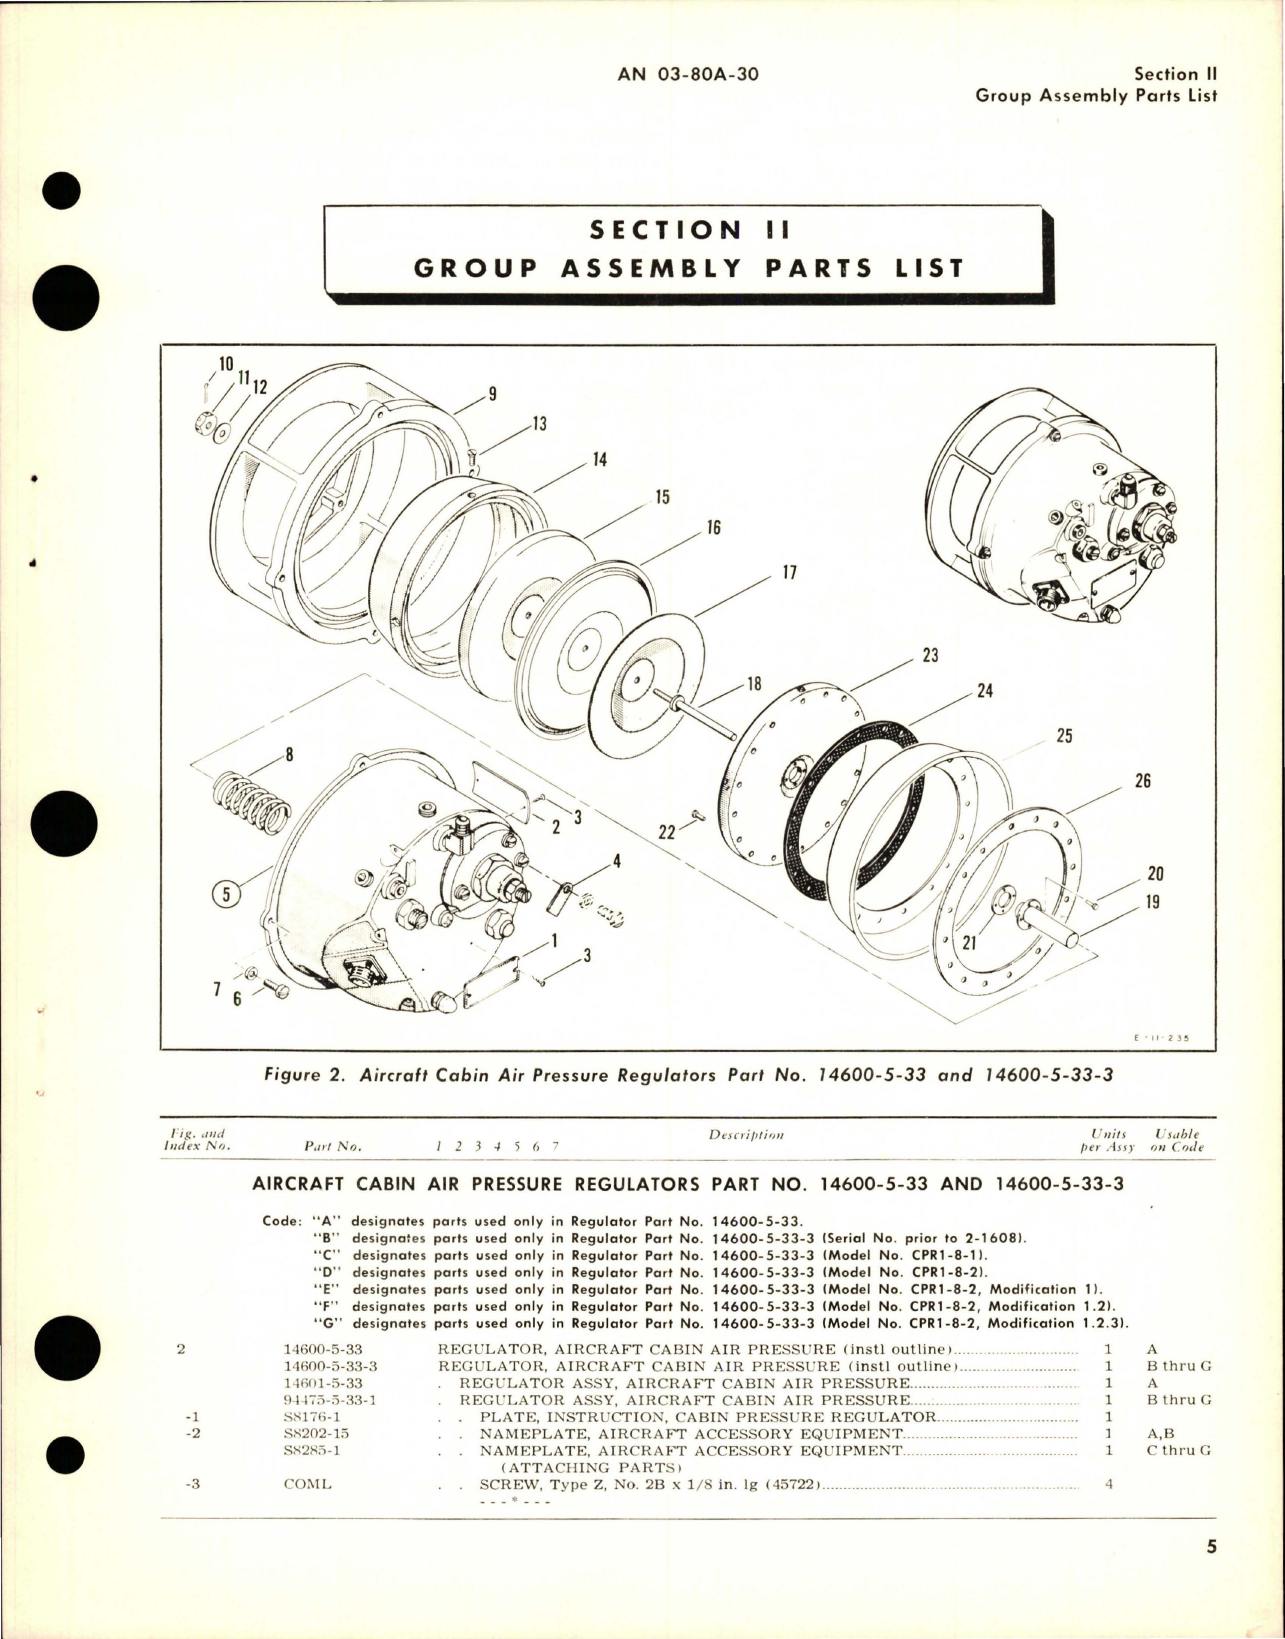 Sample page 7 from AirCorps Library document: Illustrated Parts Breakdown for Aircraft Cabin Air Pressure Regulators - Parts 14600-5-33 and 14600-5-33-3 - Model CPR1-8